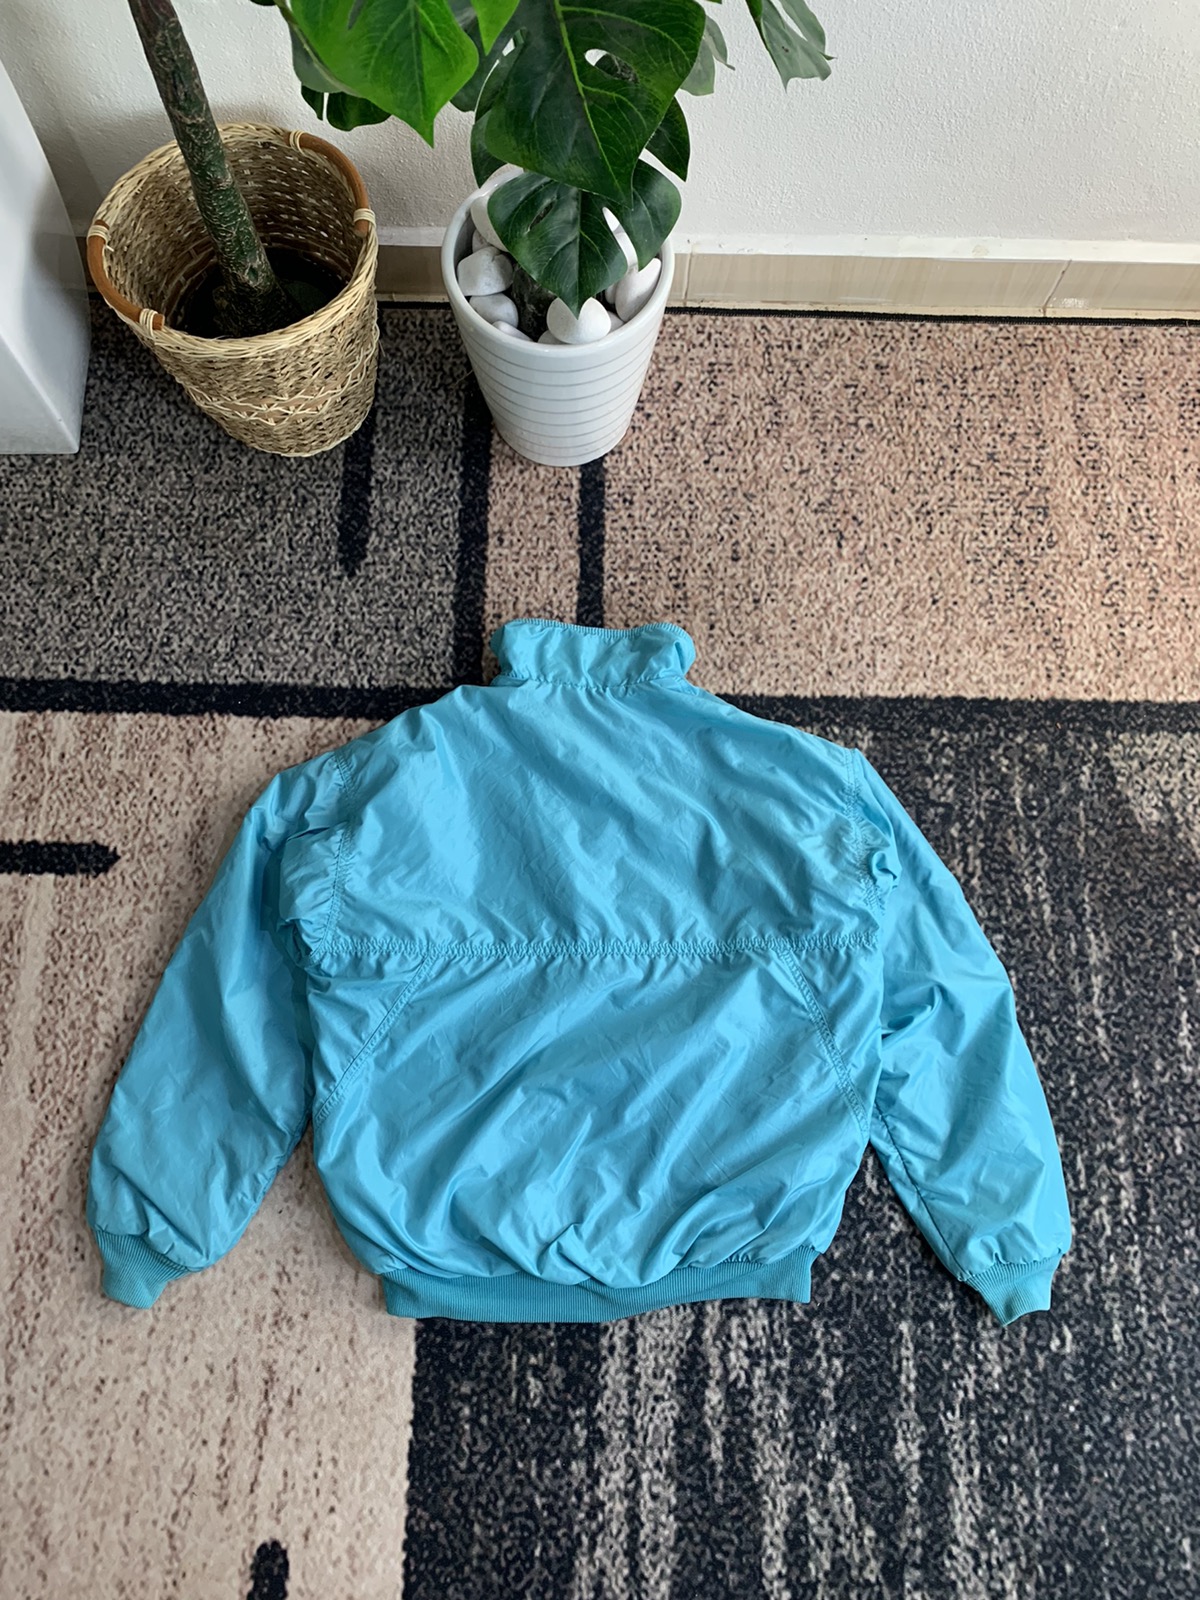 patagonia bomber jacket for 10 years old kids - 2